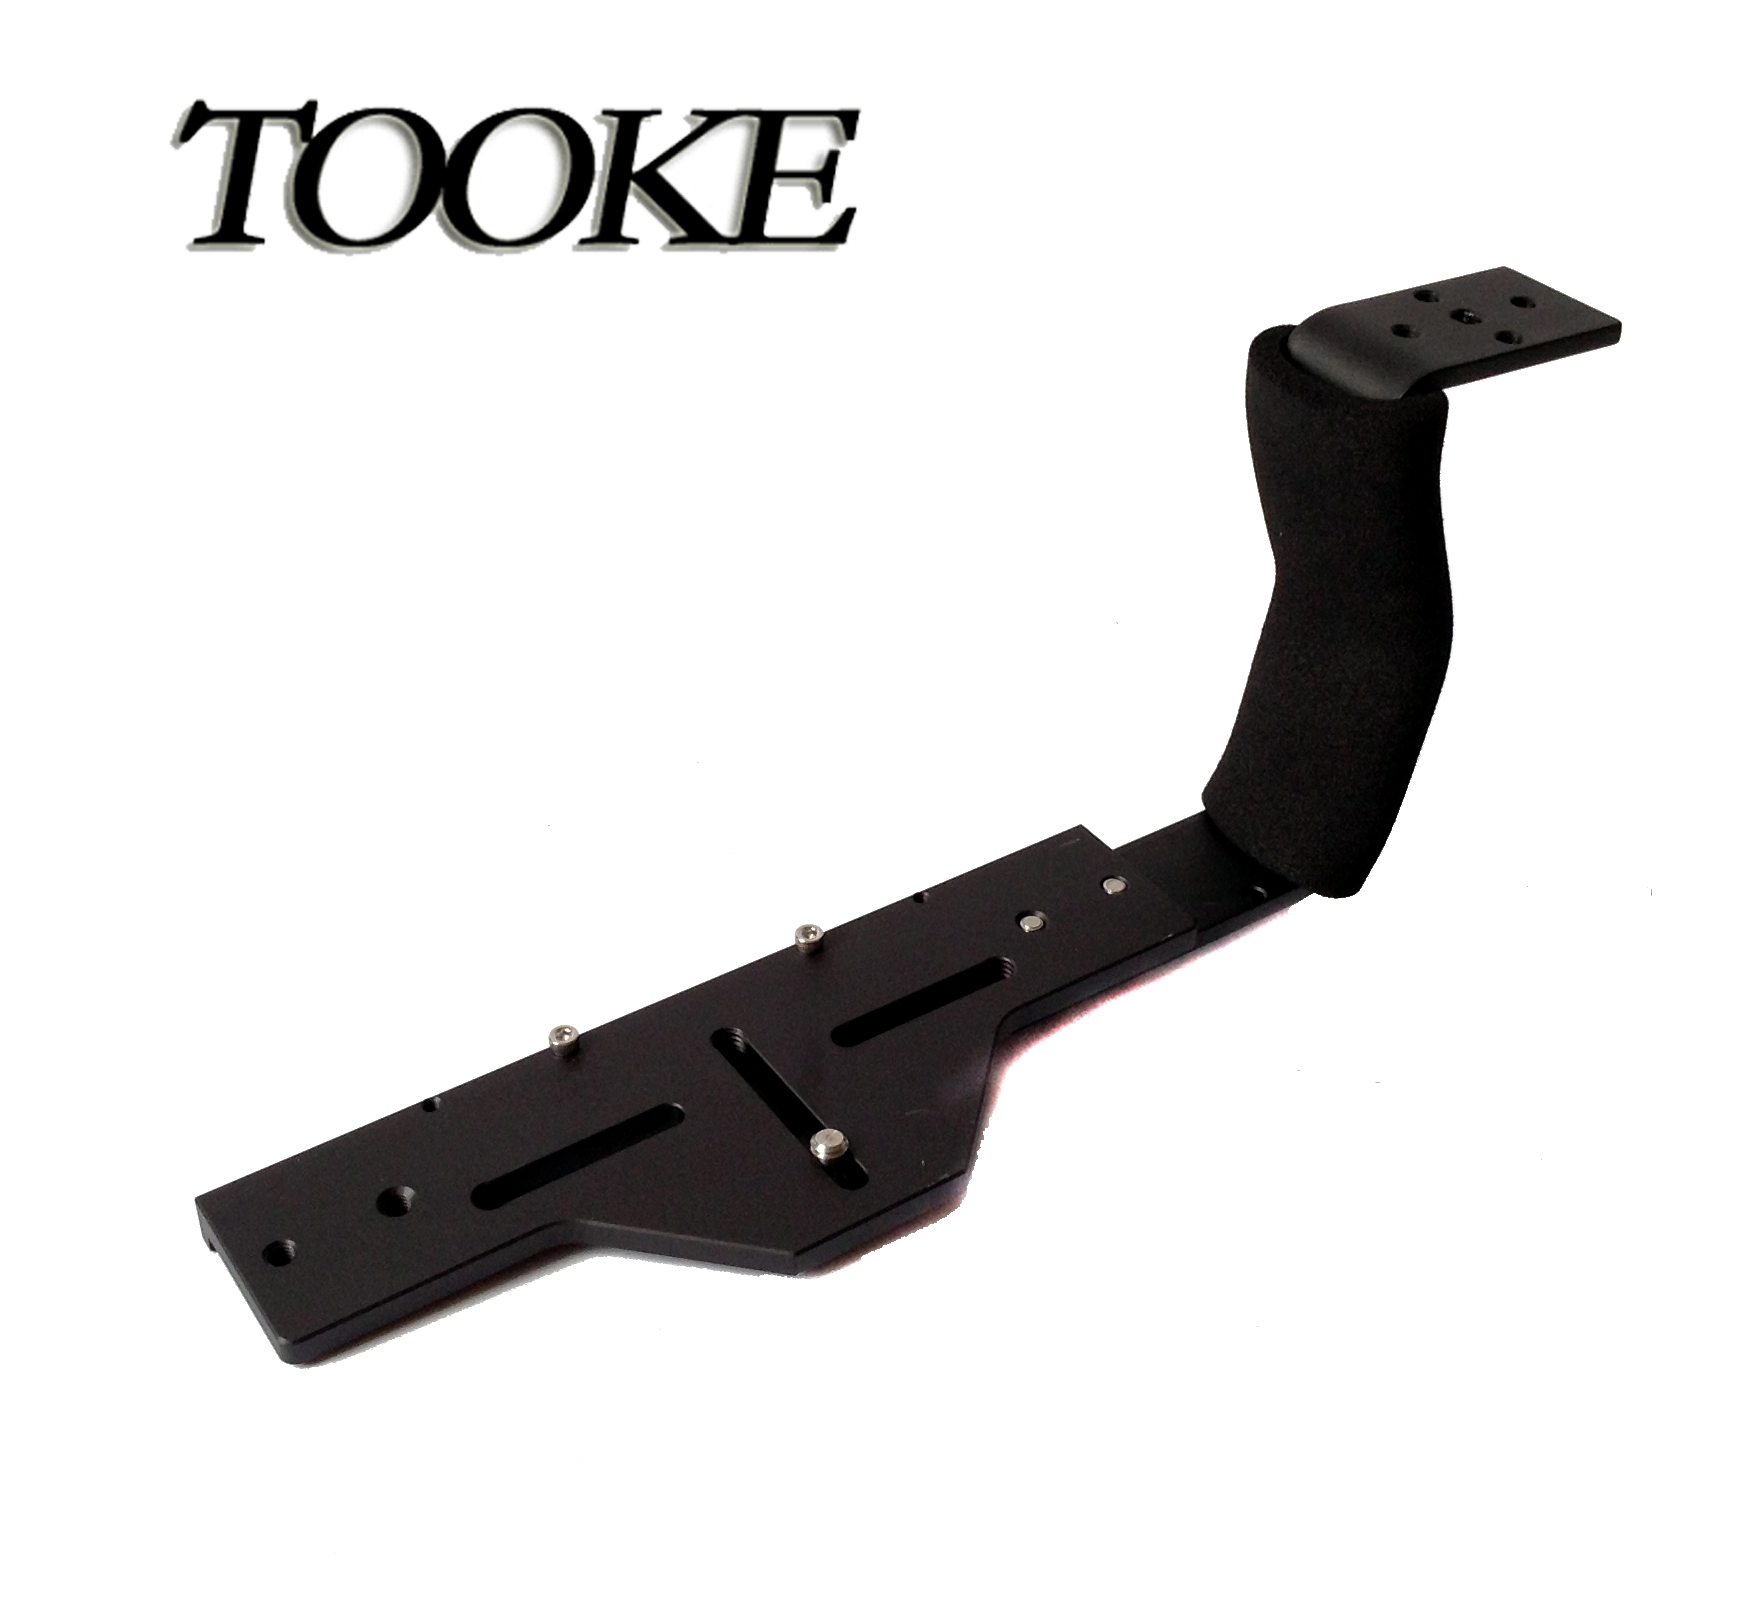 TOOKE Short Handle + Tray Diving Arm System Underwater Photography